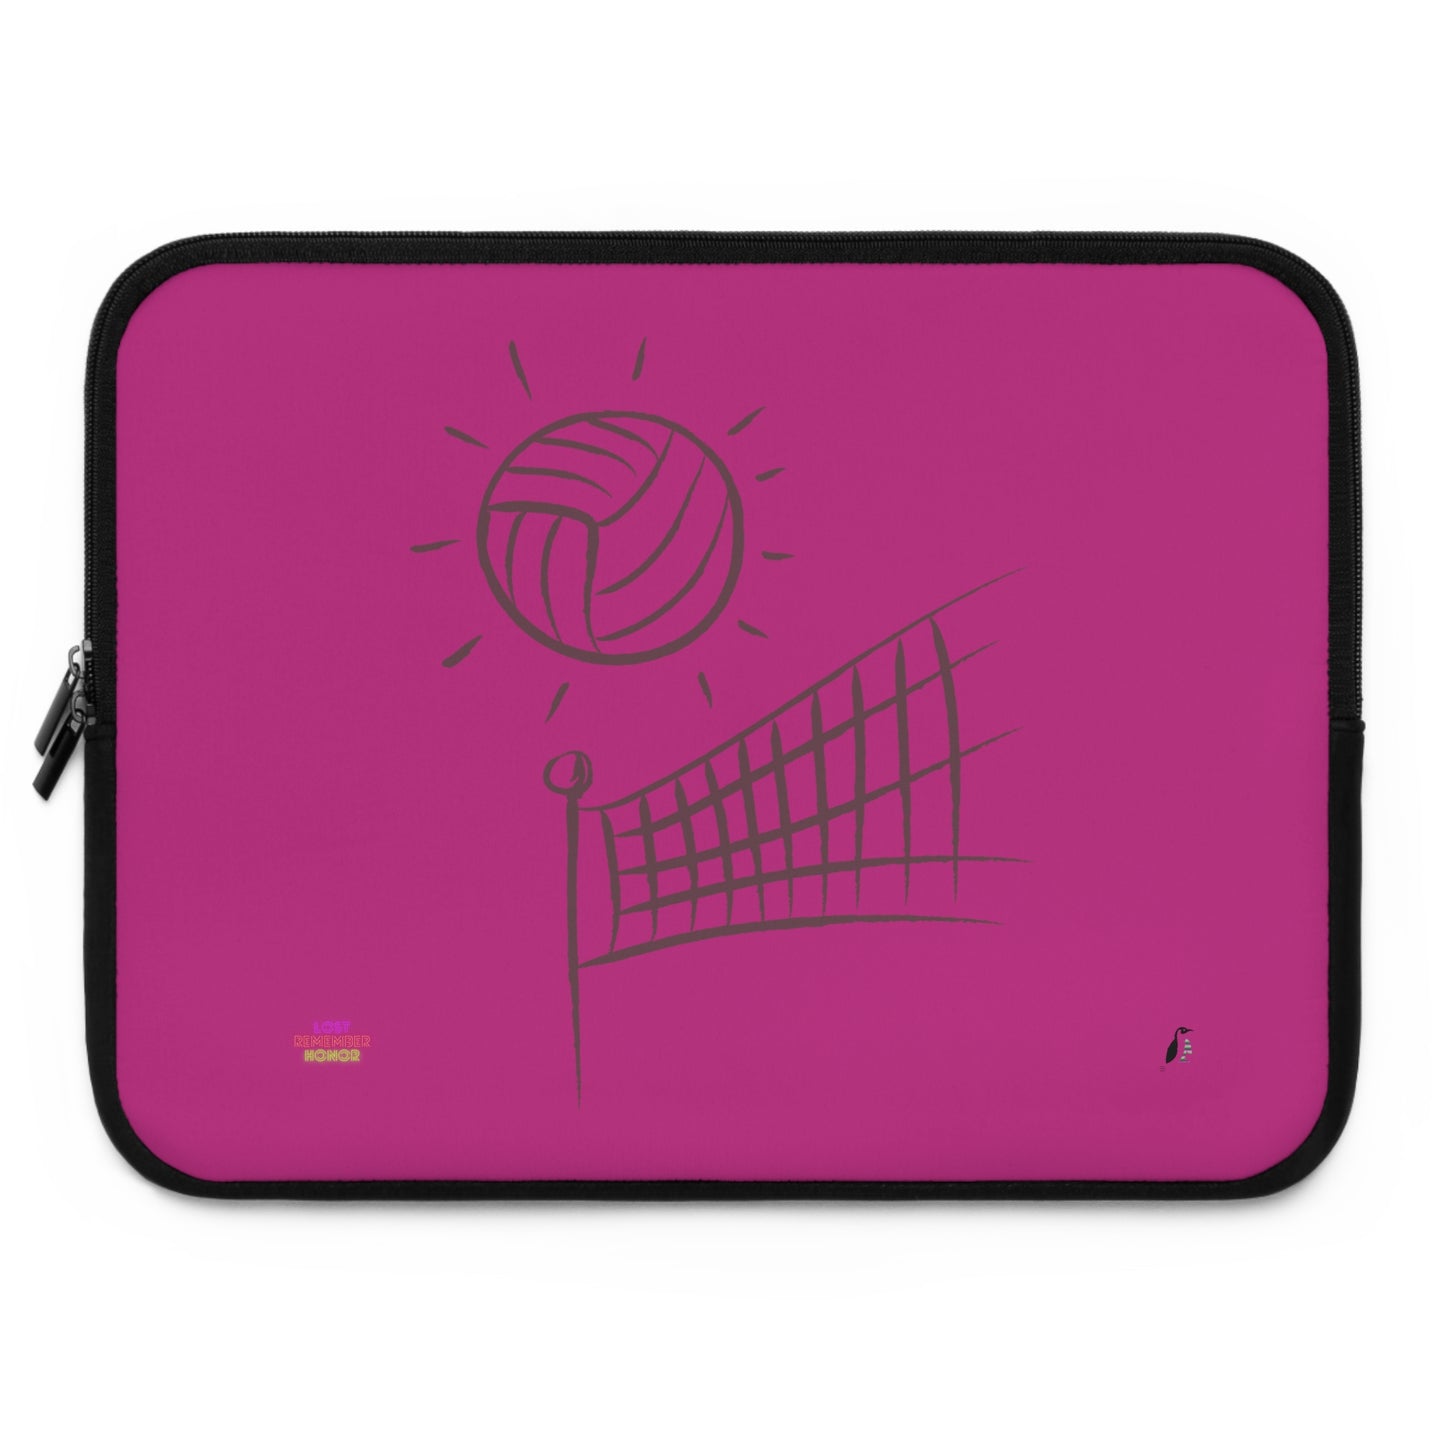 Laptop Sleeve: Volleyball Pink